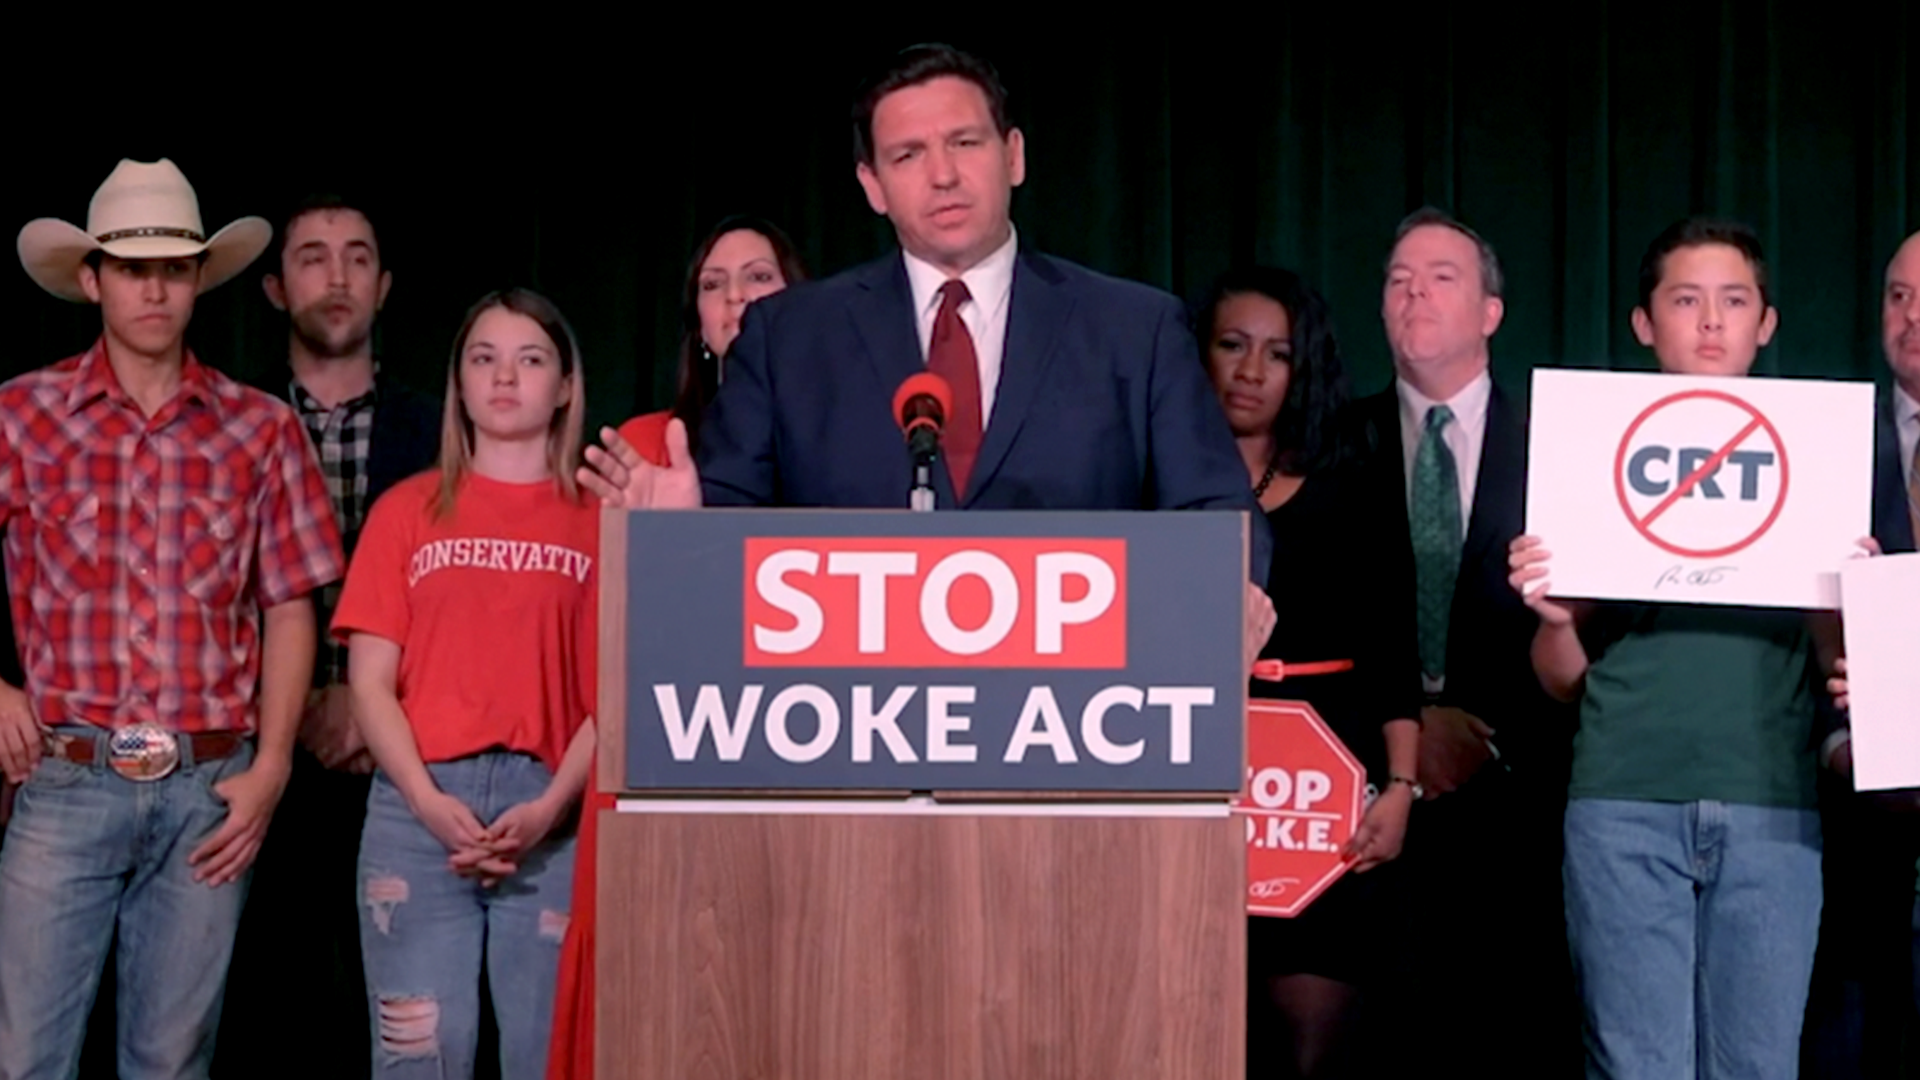 Ron DeSantis invokes MLK as he introduces Stop Woke Act targeting critical  race theory at schools, work - The Washington Post